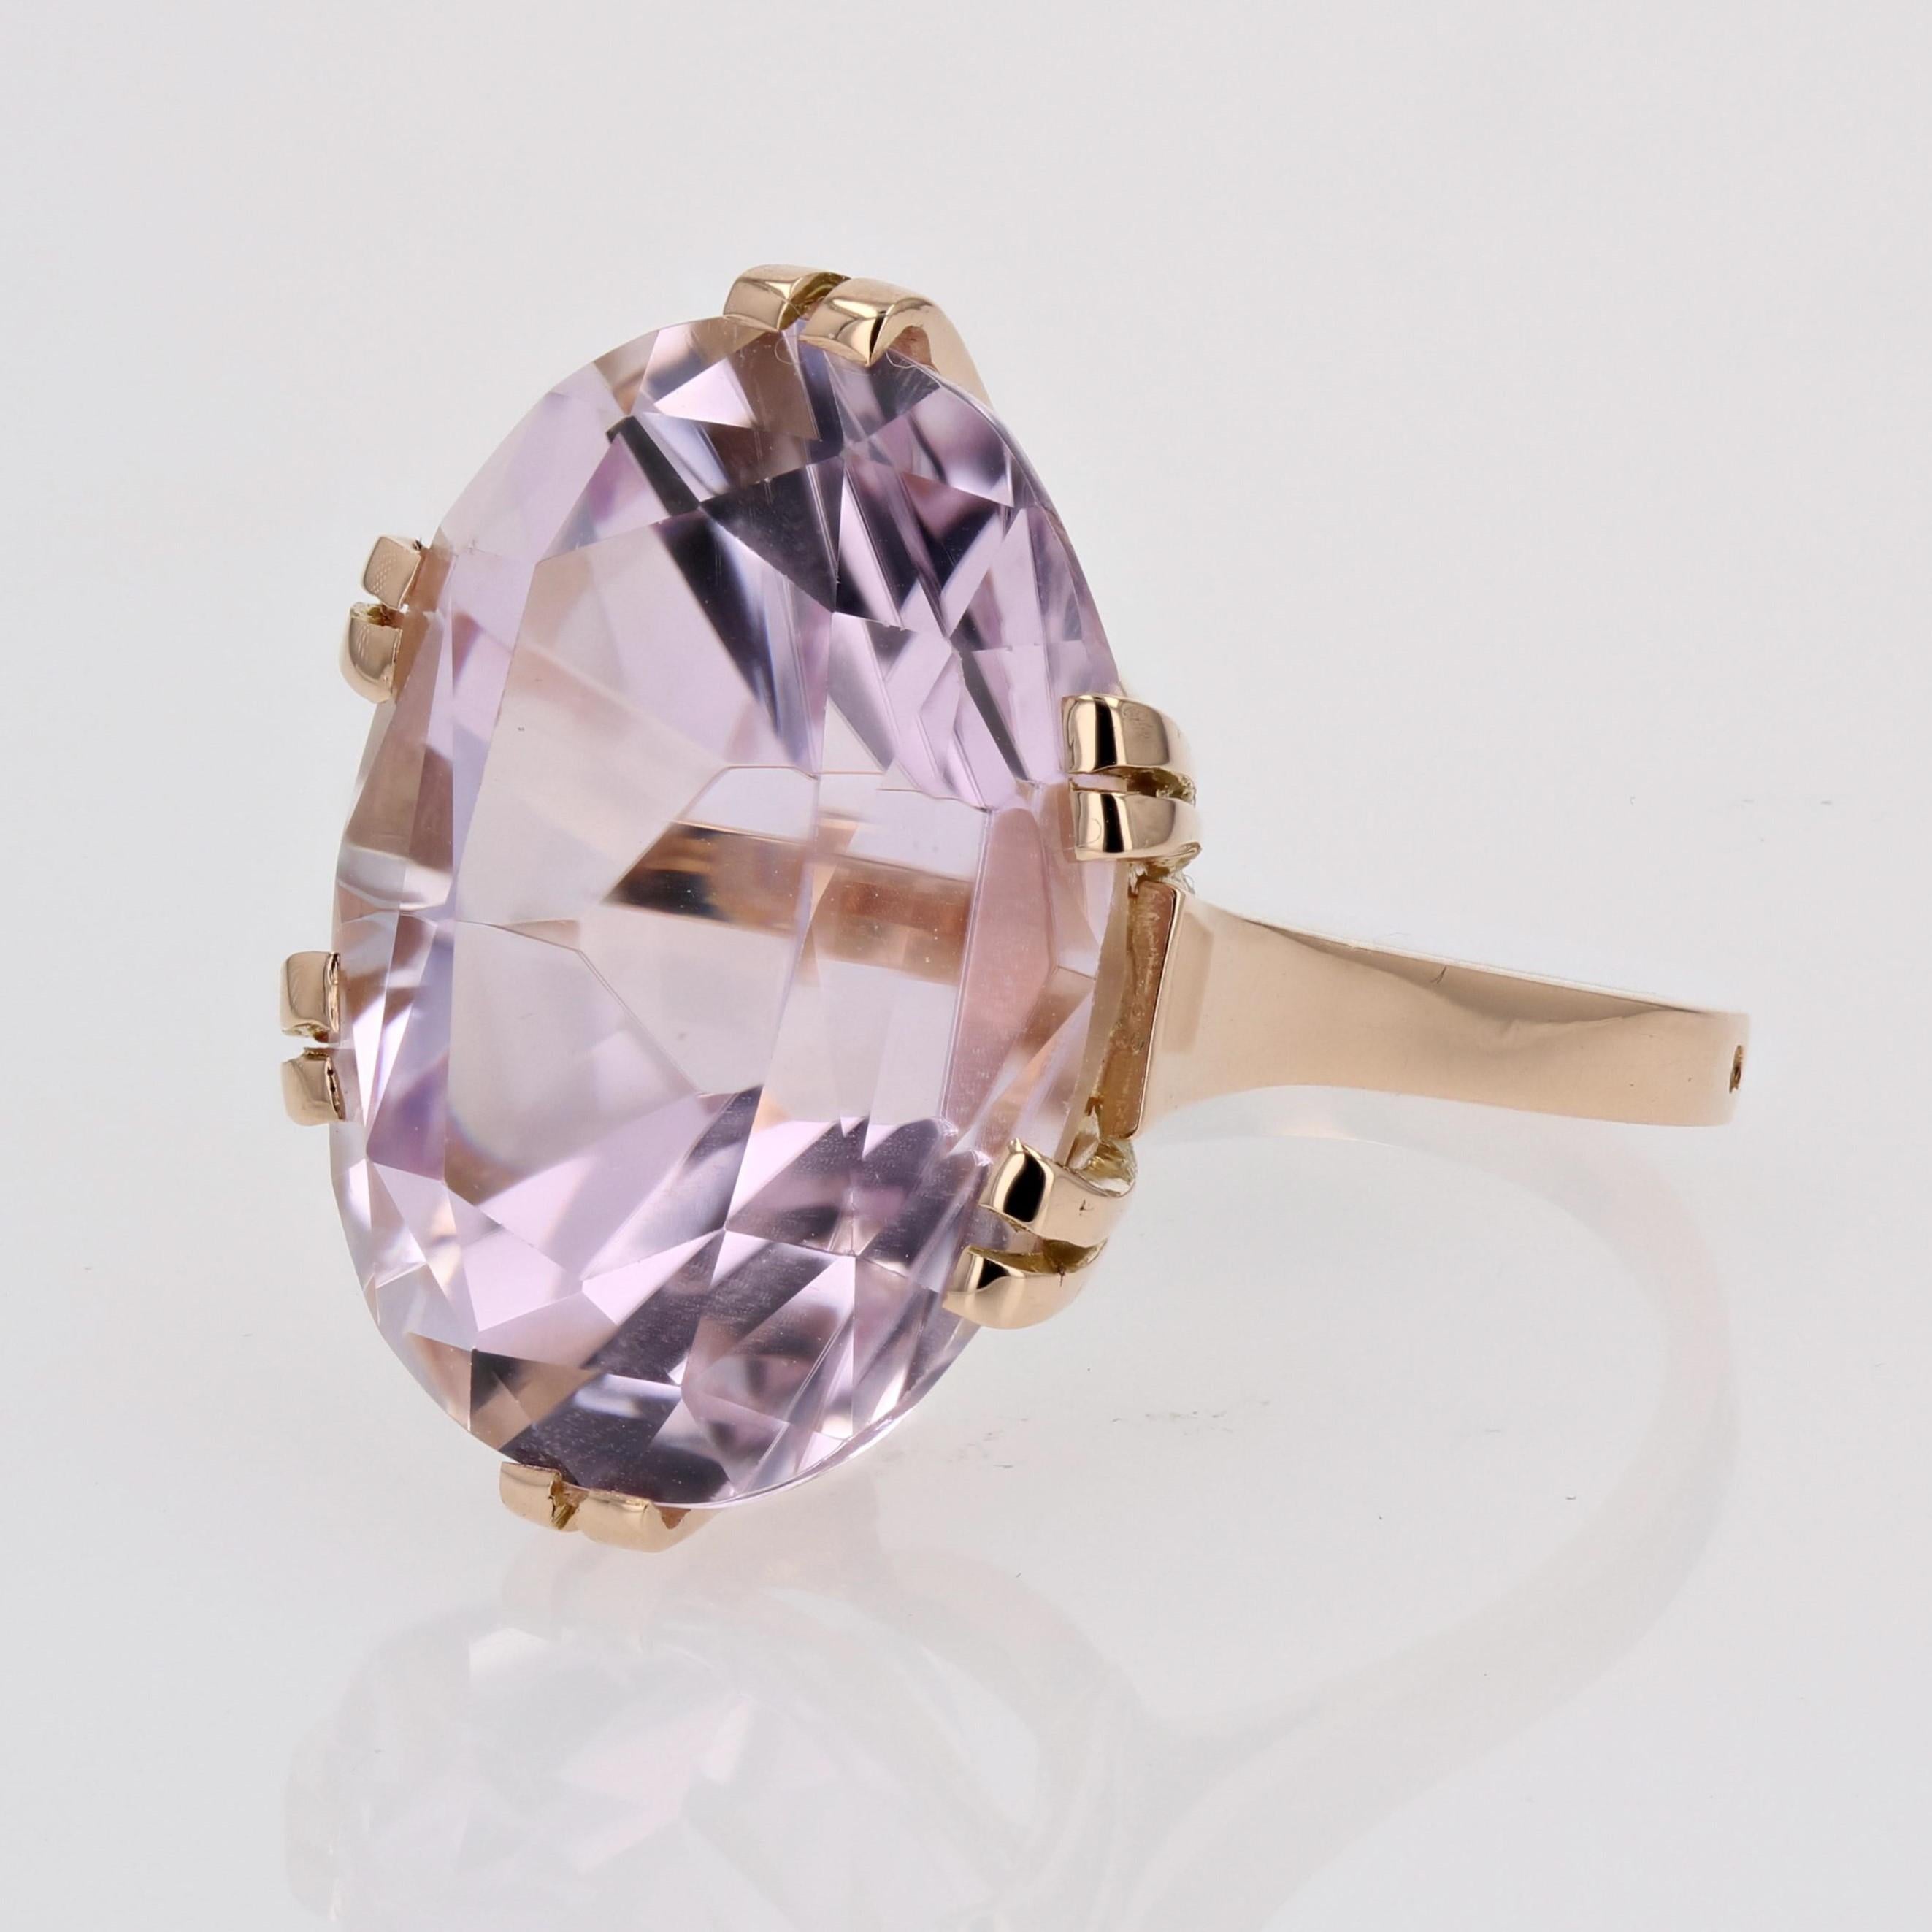 French Retro 1960s 17.71 Carats Kunzite 18 Karat Rose Gold Cocktail Ring For Sale 3